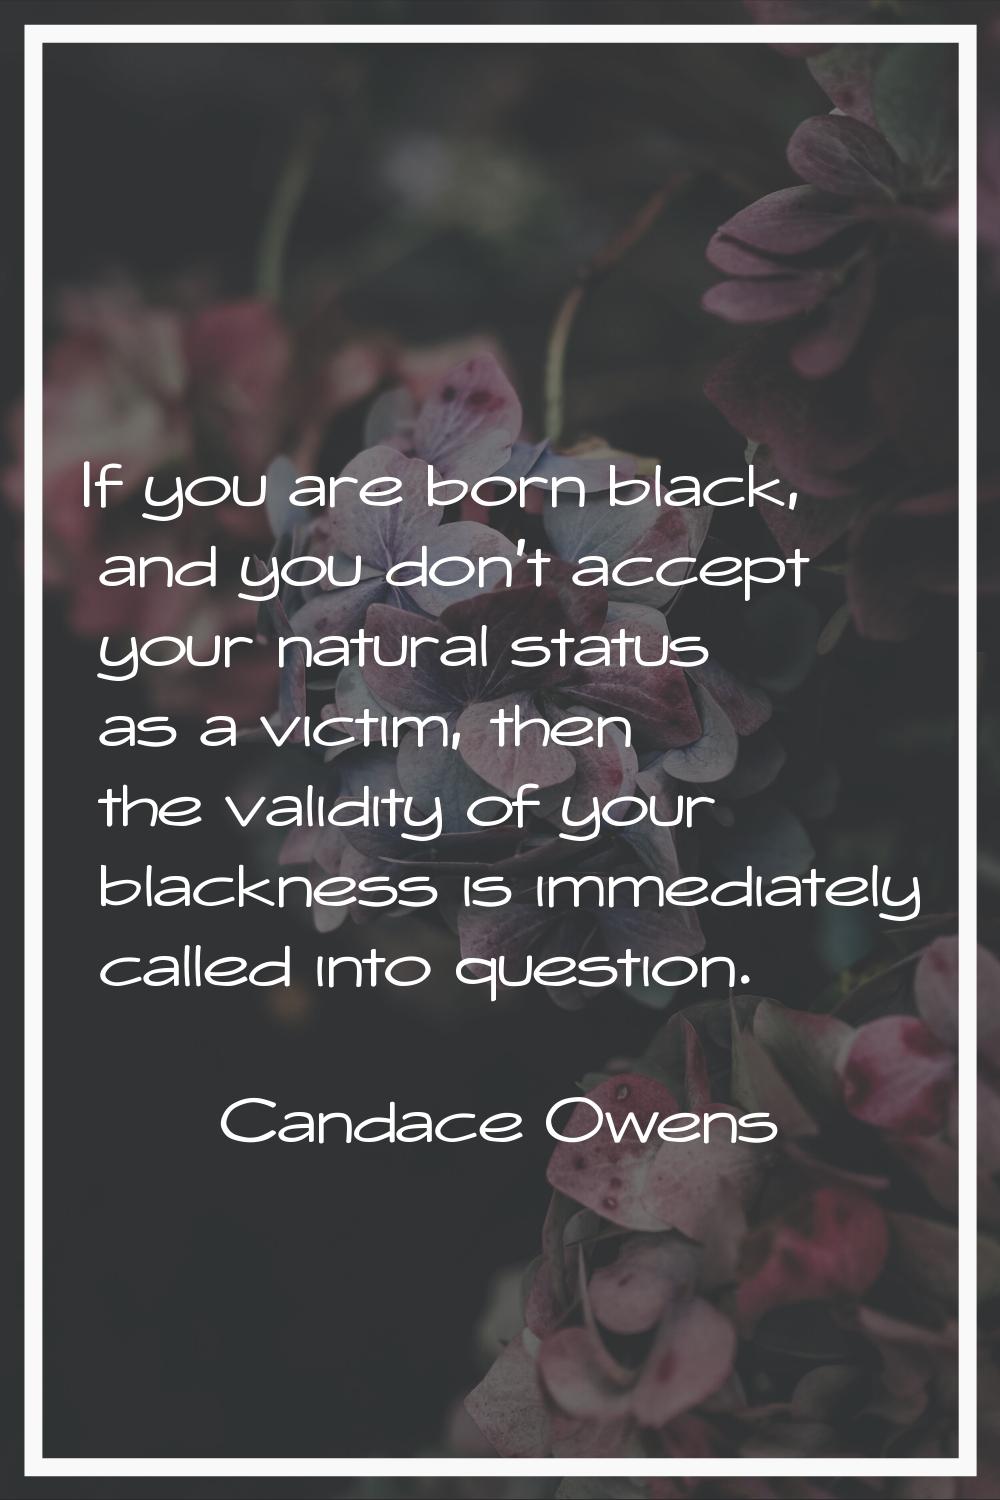 If you are born black, and you don't accept your natural status as a victim, then the validity of y